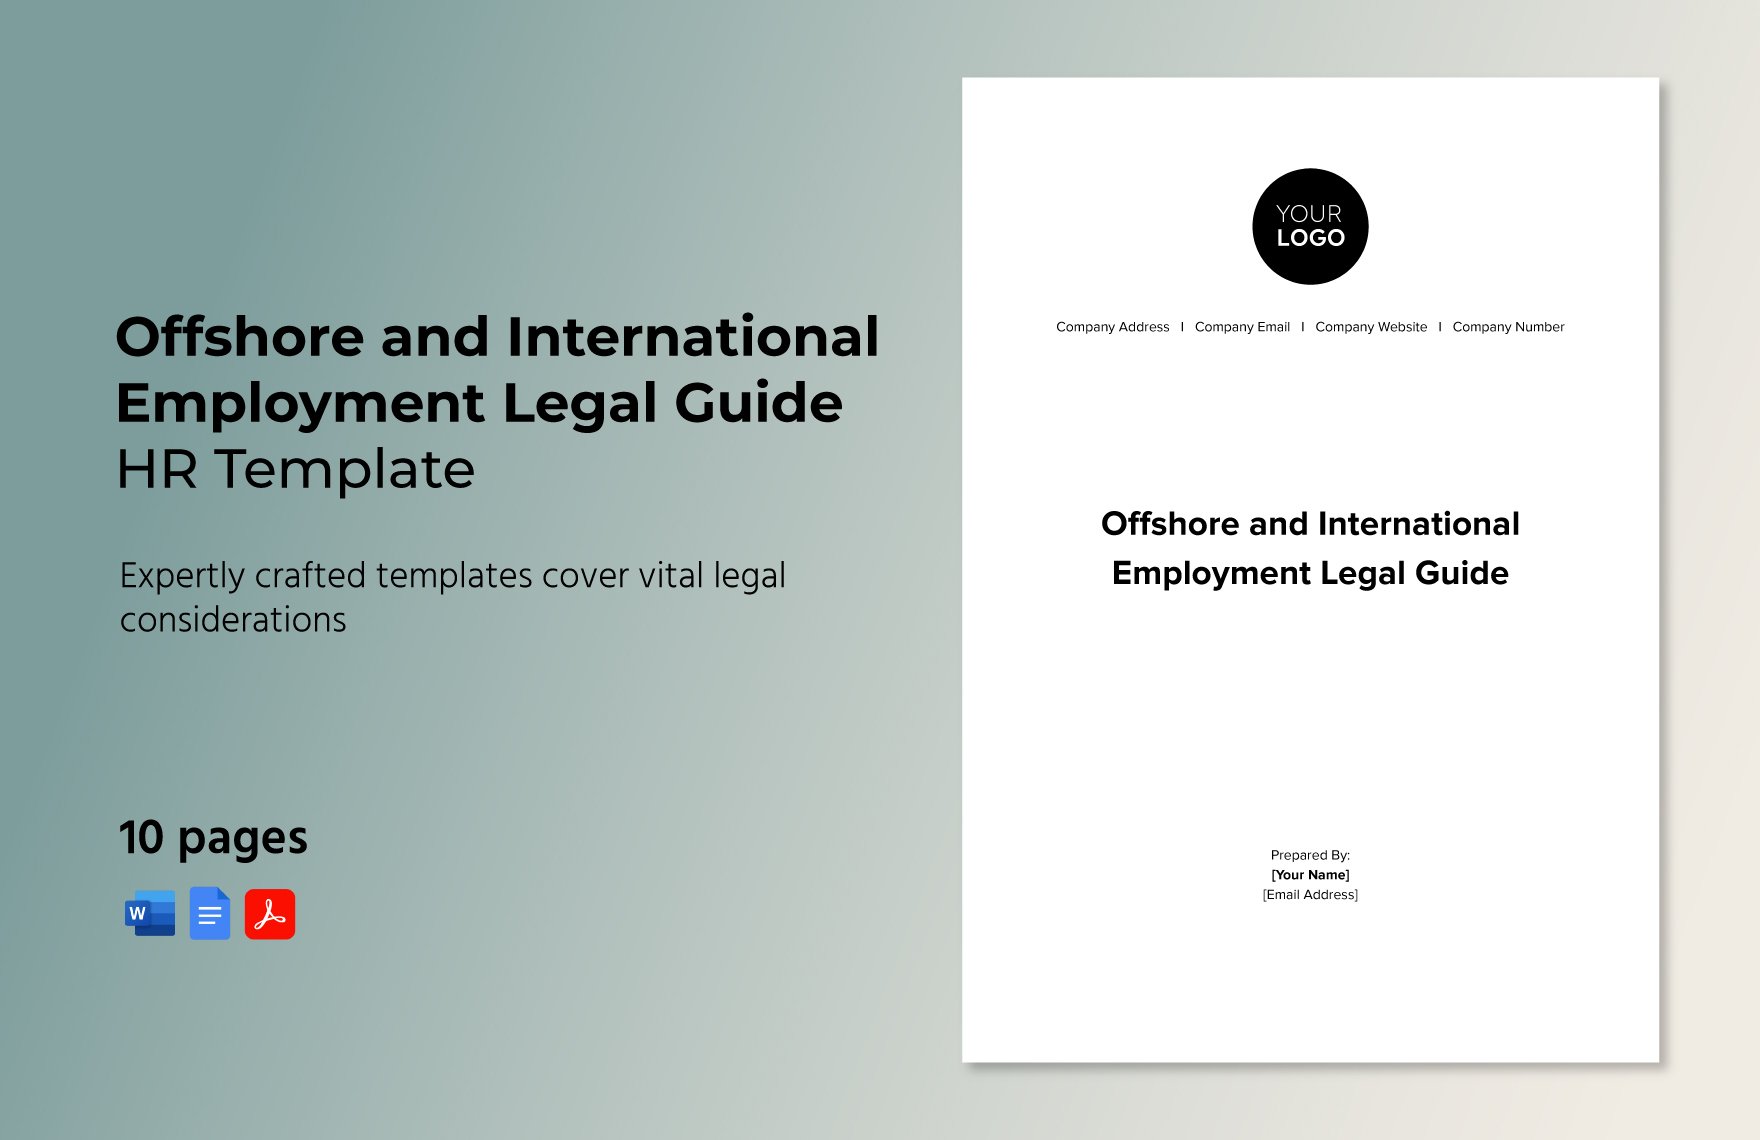 Offshore and International Employment Legal Guide HR Template